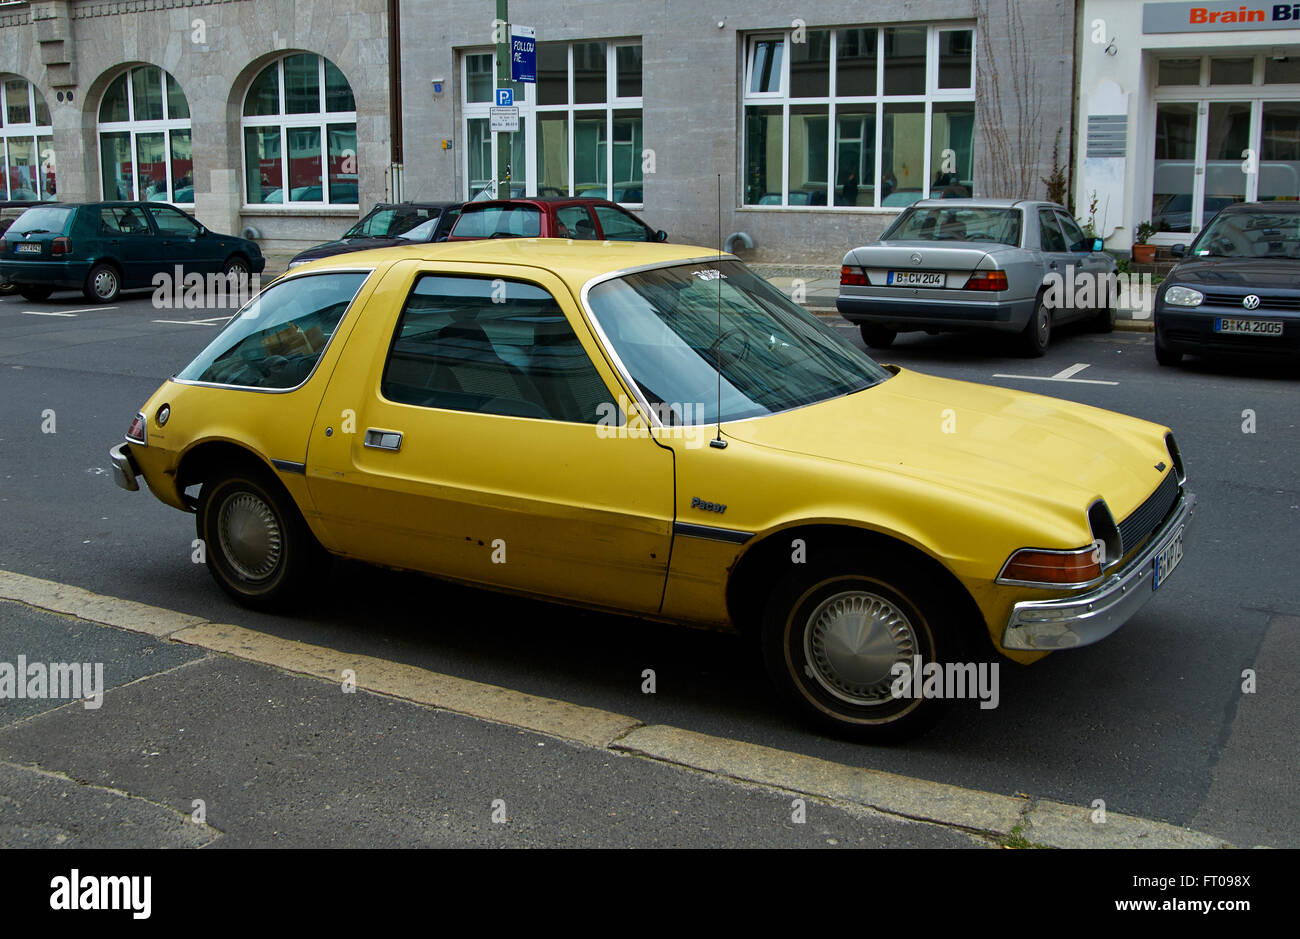 The AMC Pacer is a two-door compact automobile that was produced in the United States by the American Motors Corporation between Stock Photo